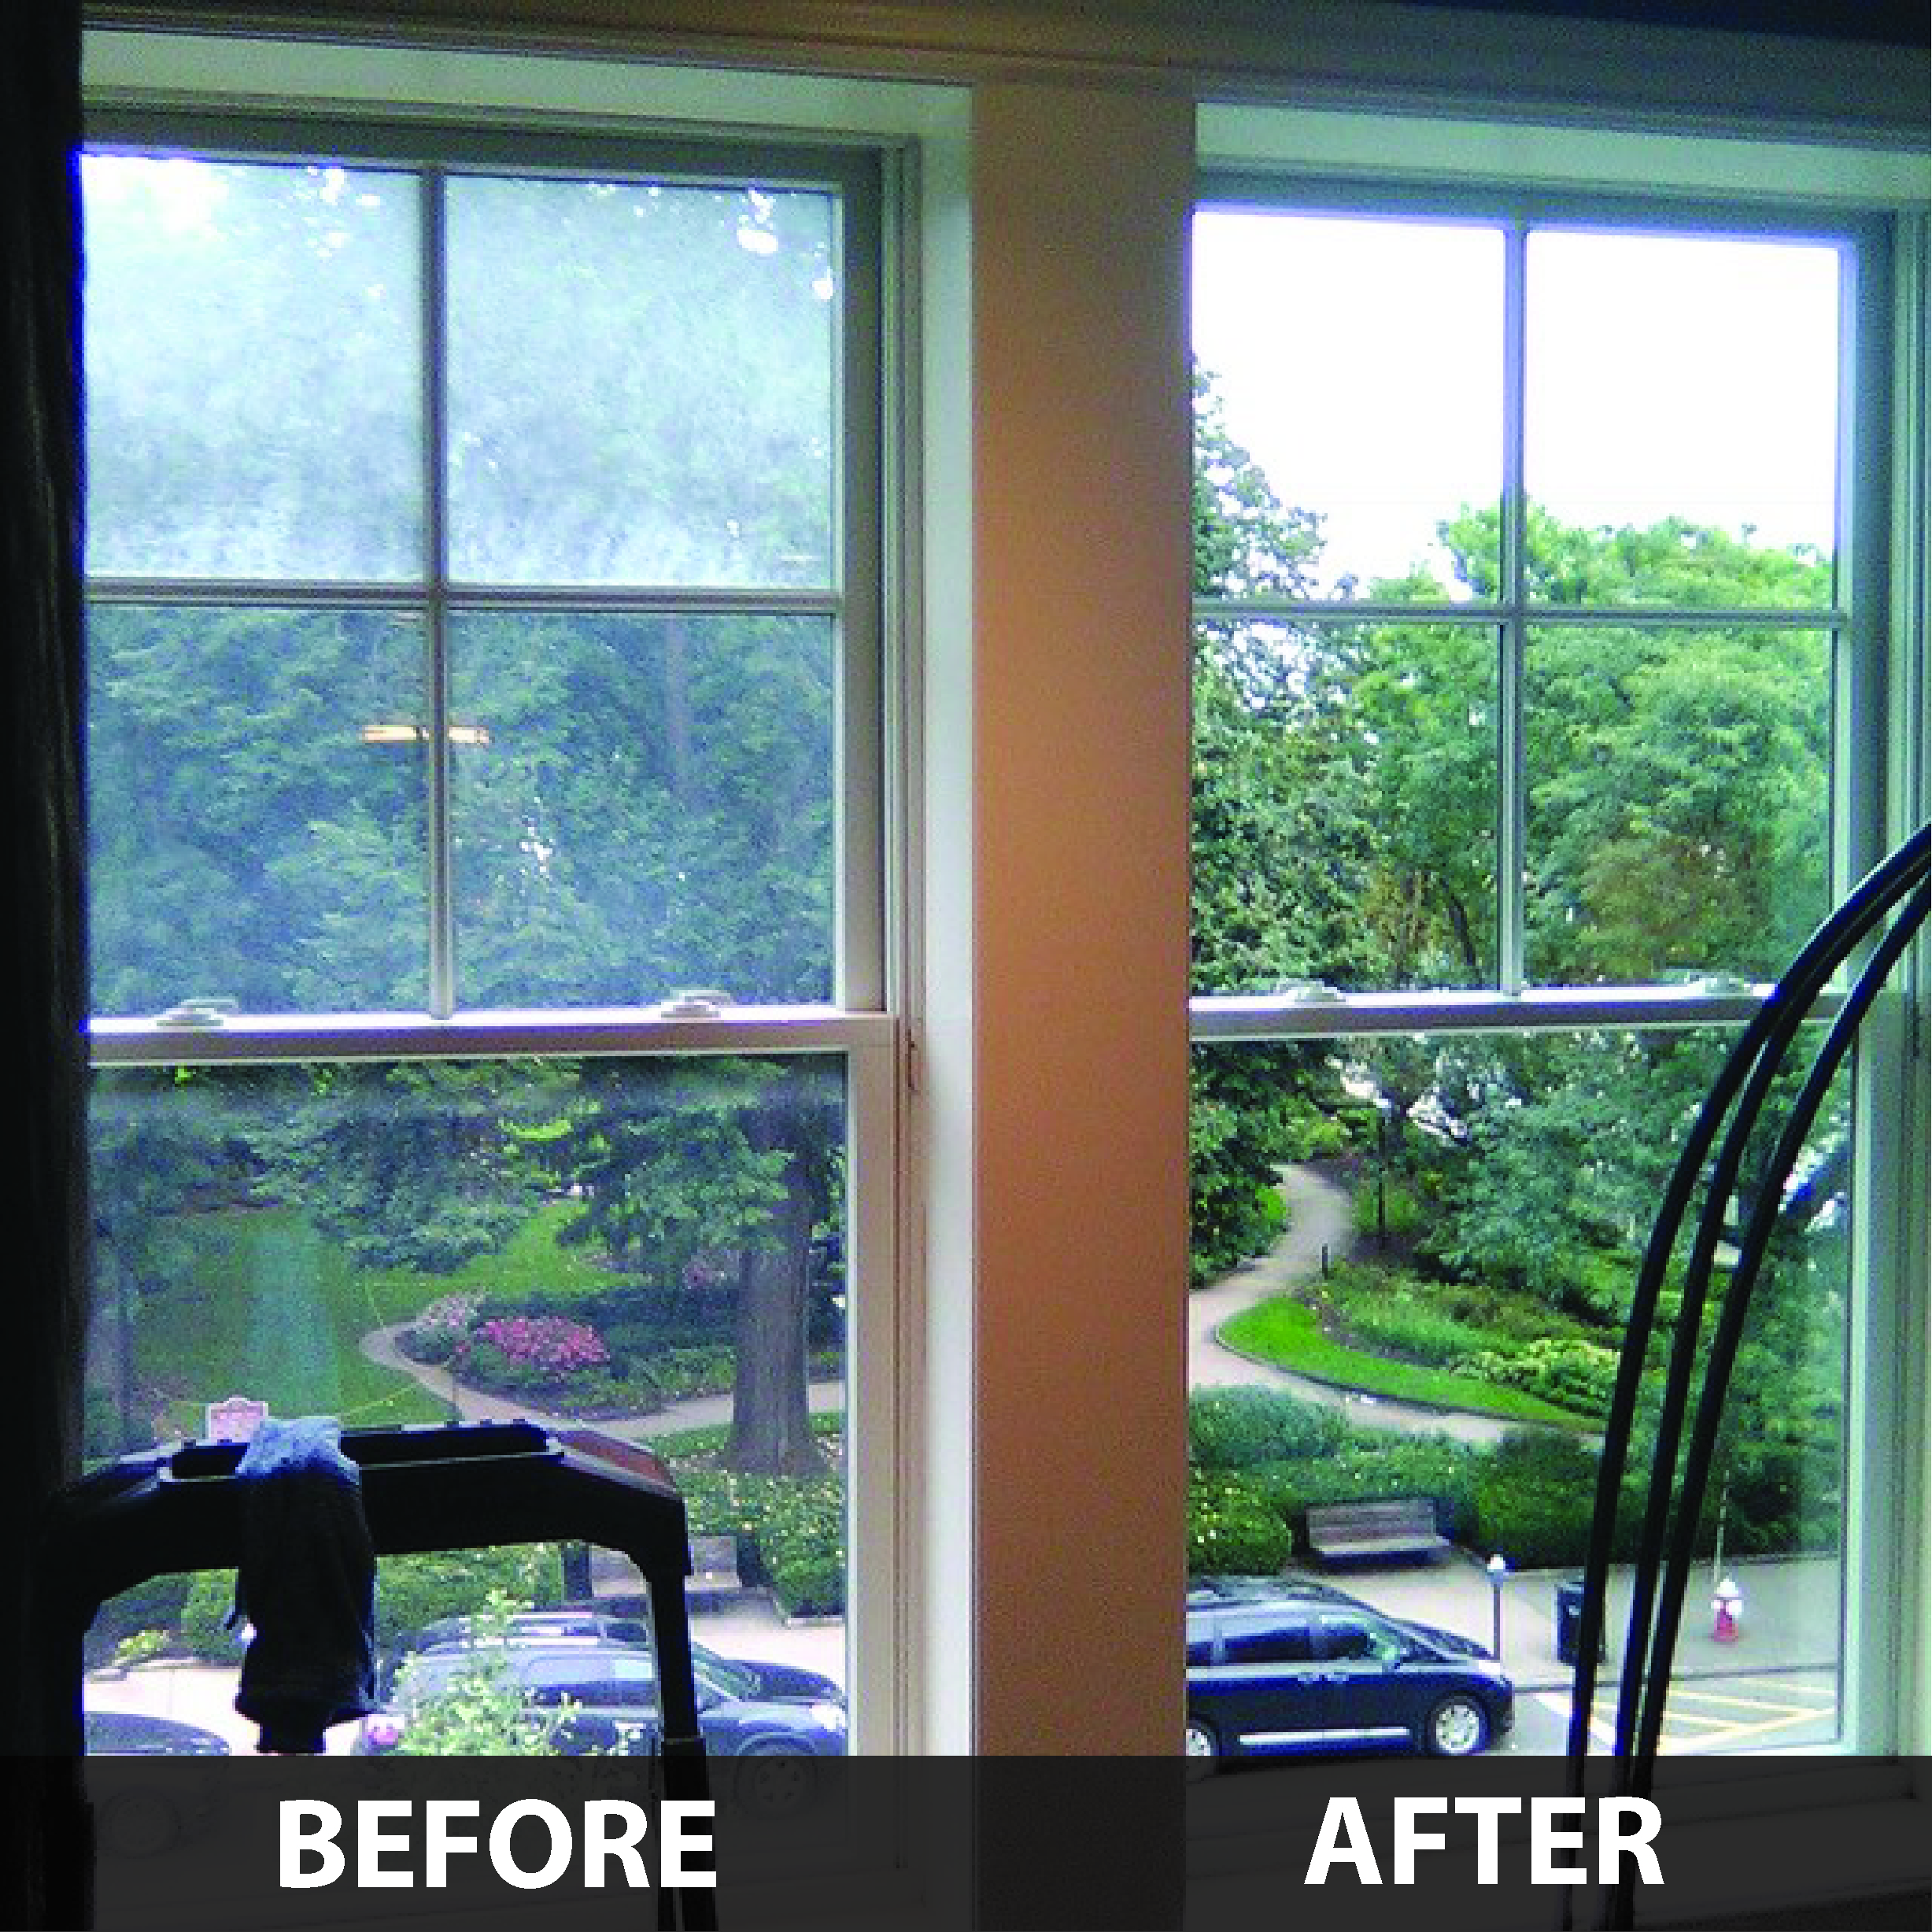 Before and After Photos Showing Effect of Window Cleaning Services